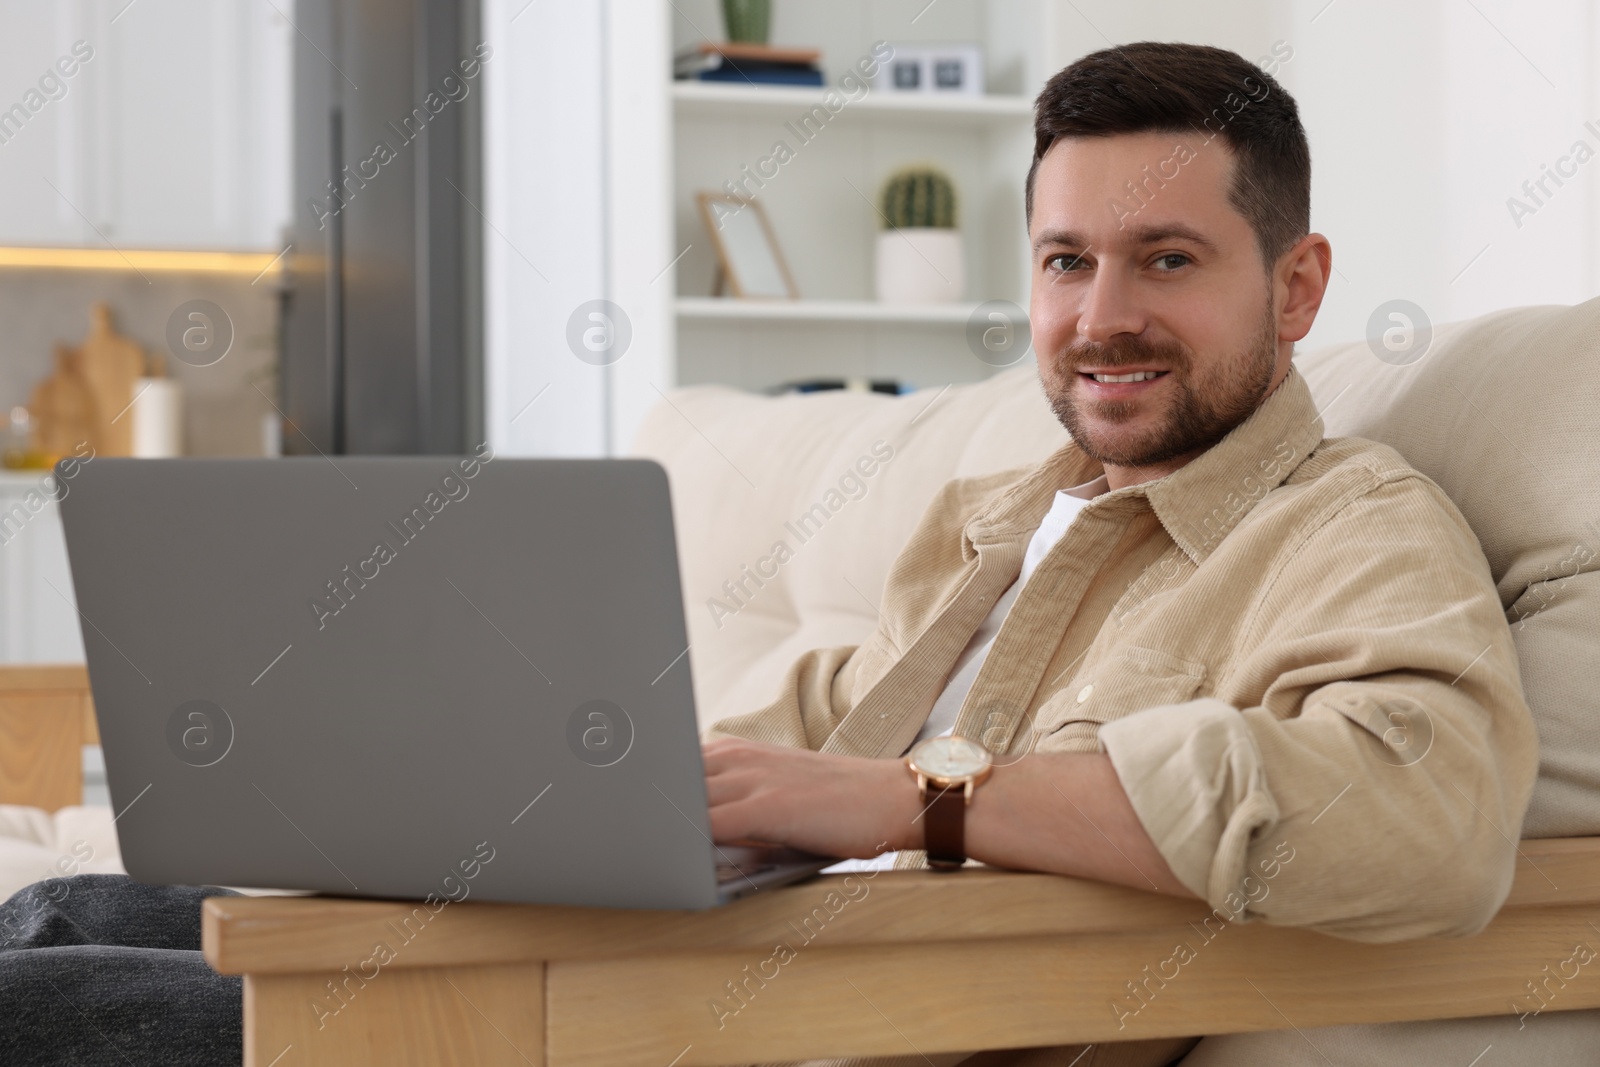 Photo of Happy man working with laptop on sofa in room